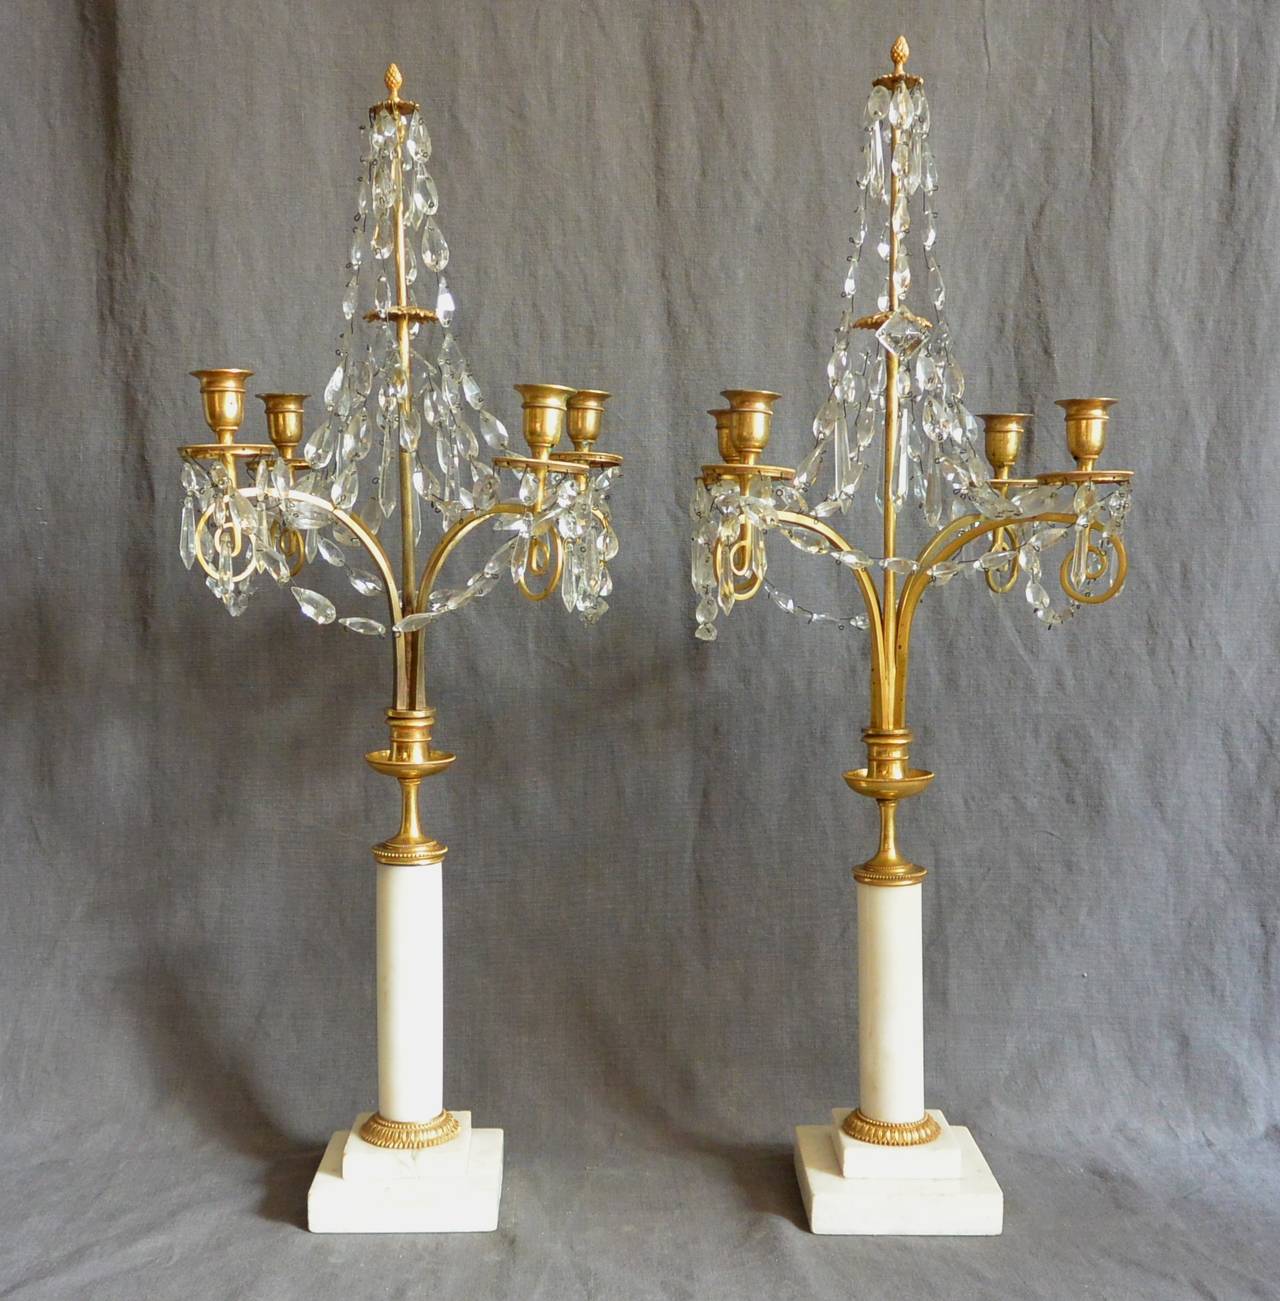 Pair of Continental crystal and marble candelabra. Ormolu, crystal and white marble four-arm candelabra with delicate crystal drops suspended from pierced bobeche. Possibly Swedish or Russian, circa 1820.
Dimension:
Candelabra 1: 4.5